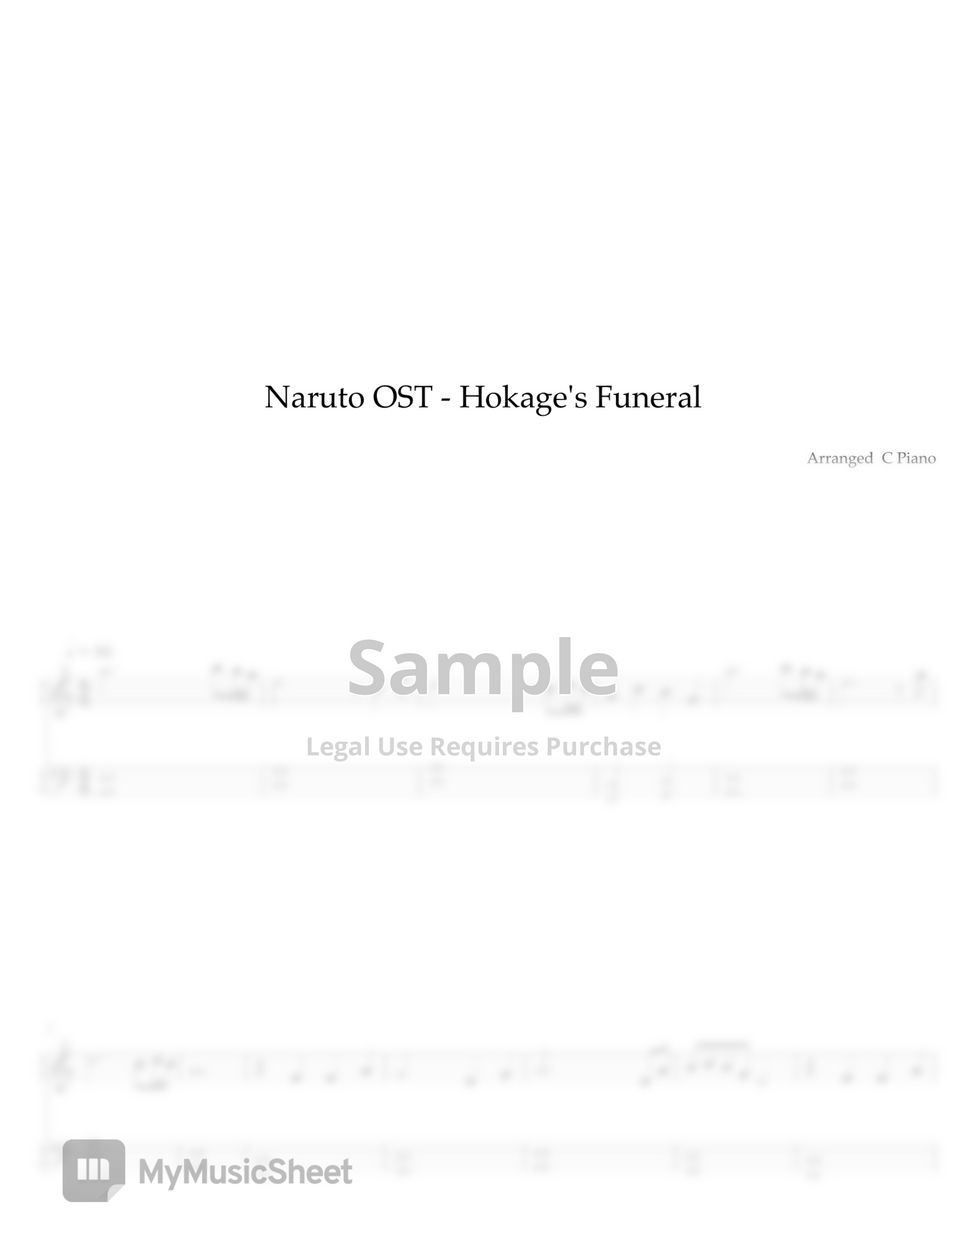 Naruto OST - Hokage's Funeral (Easy Version) by C Piano